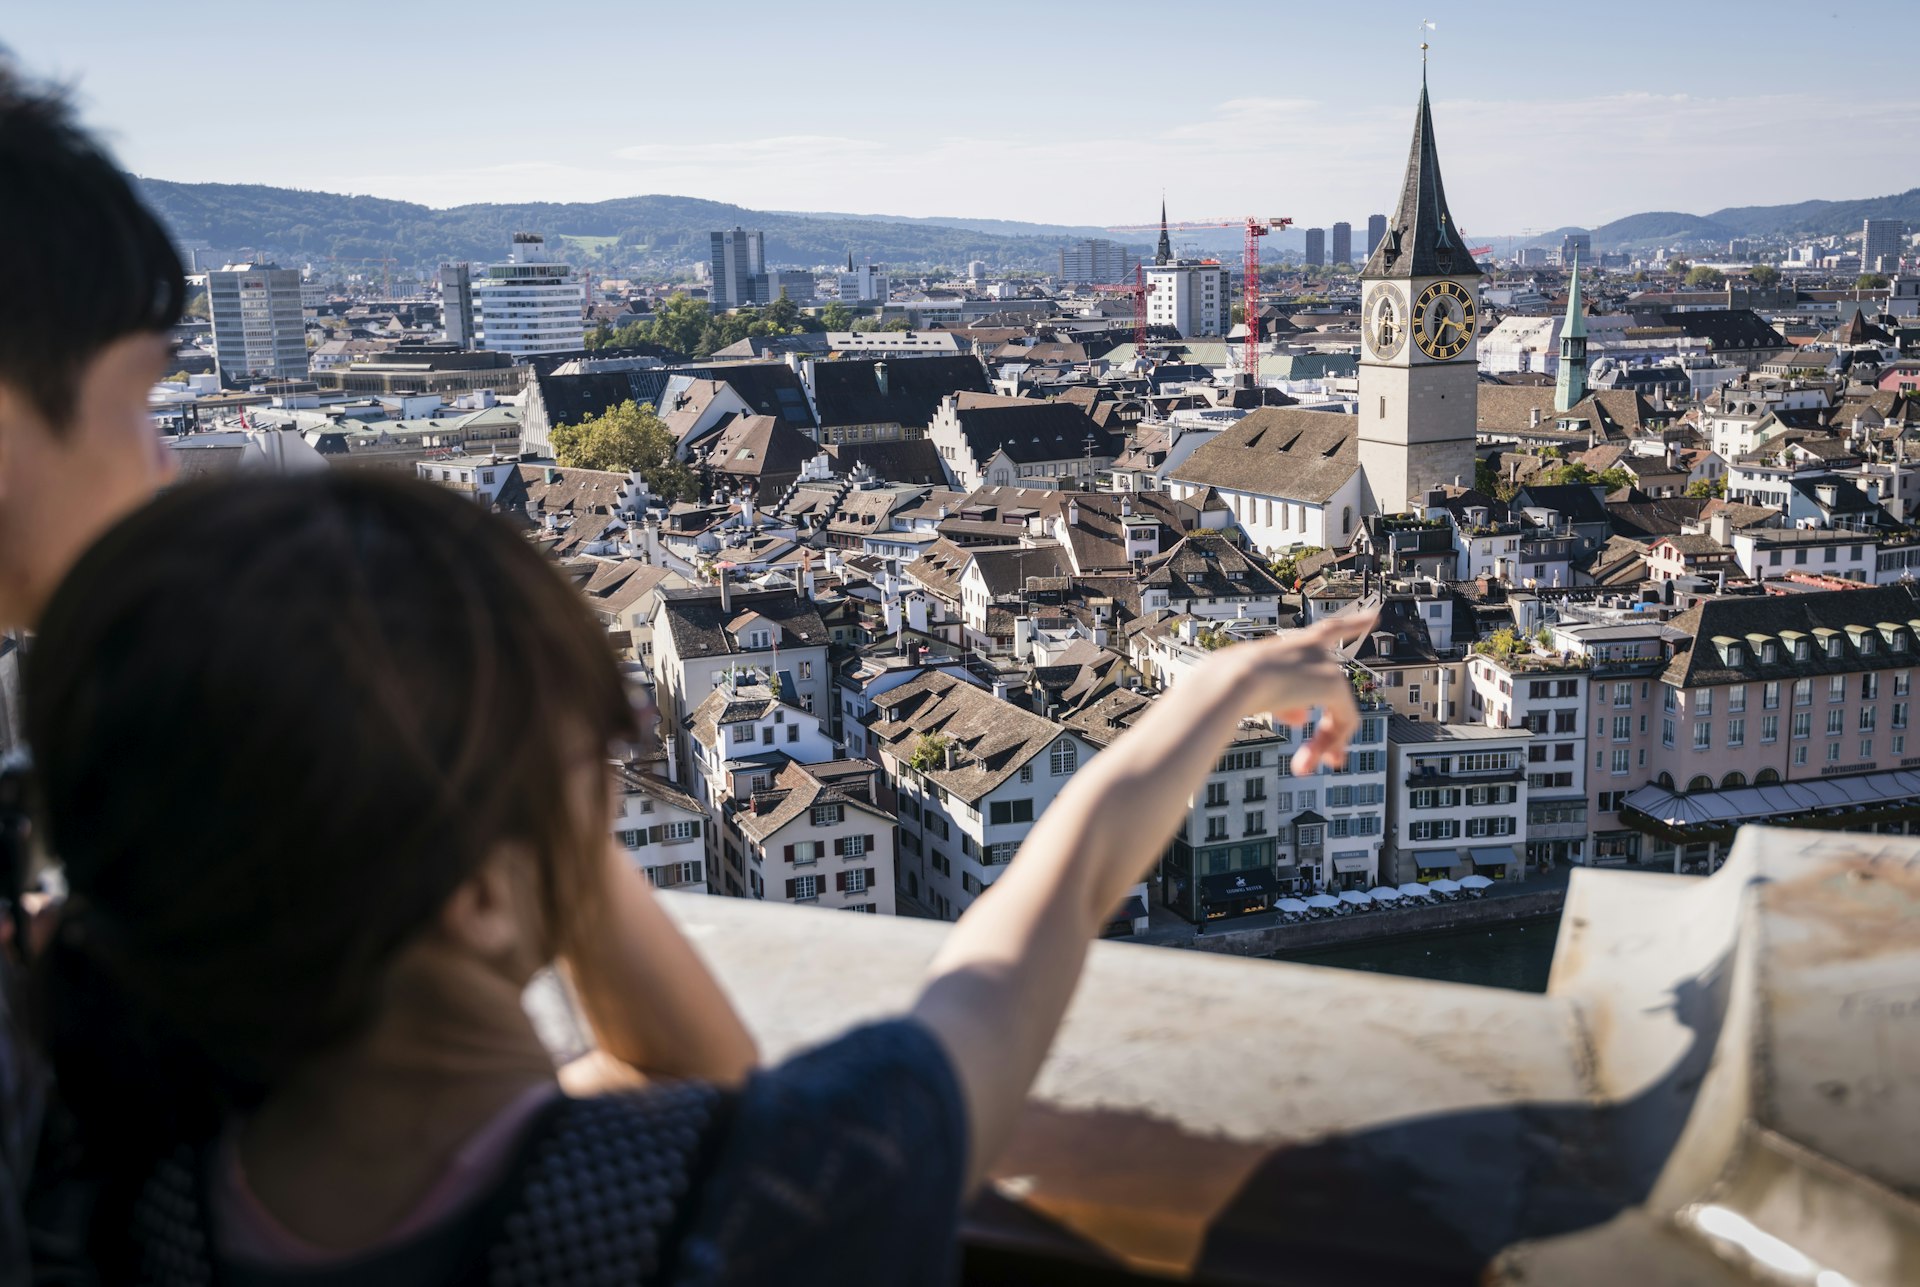 Two Asian tourists are taking a look at Zurich's old town from the observation deck on top of Grossmunster cathedral